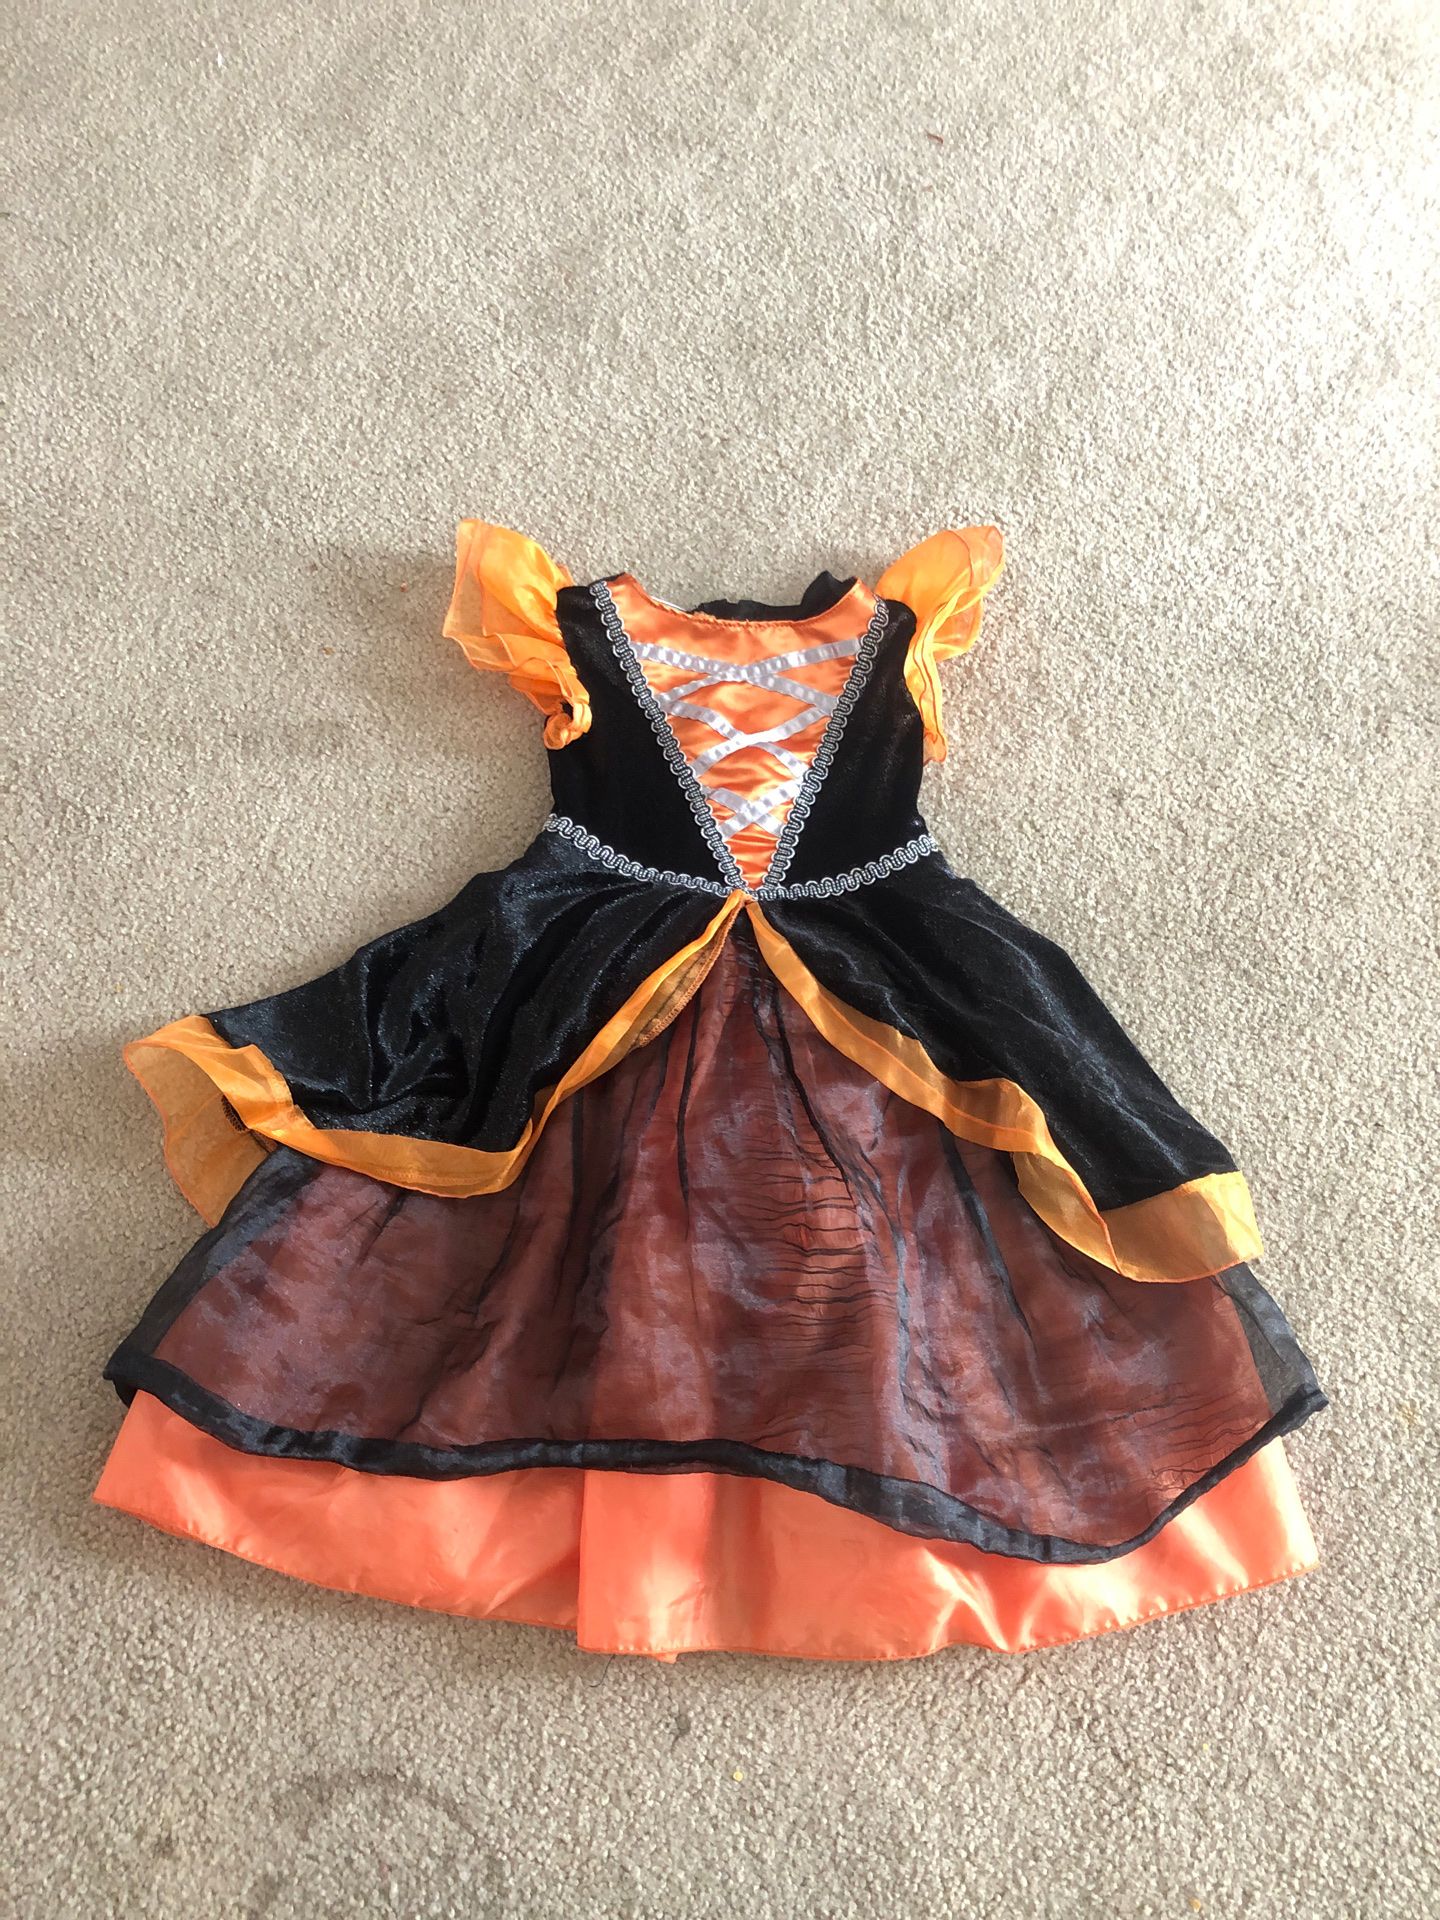 Size 24 month witch costume